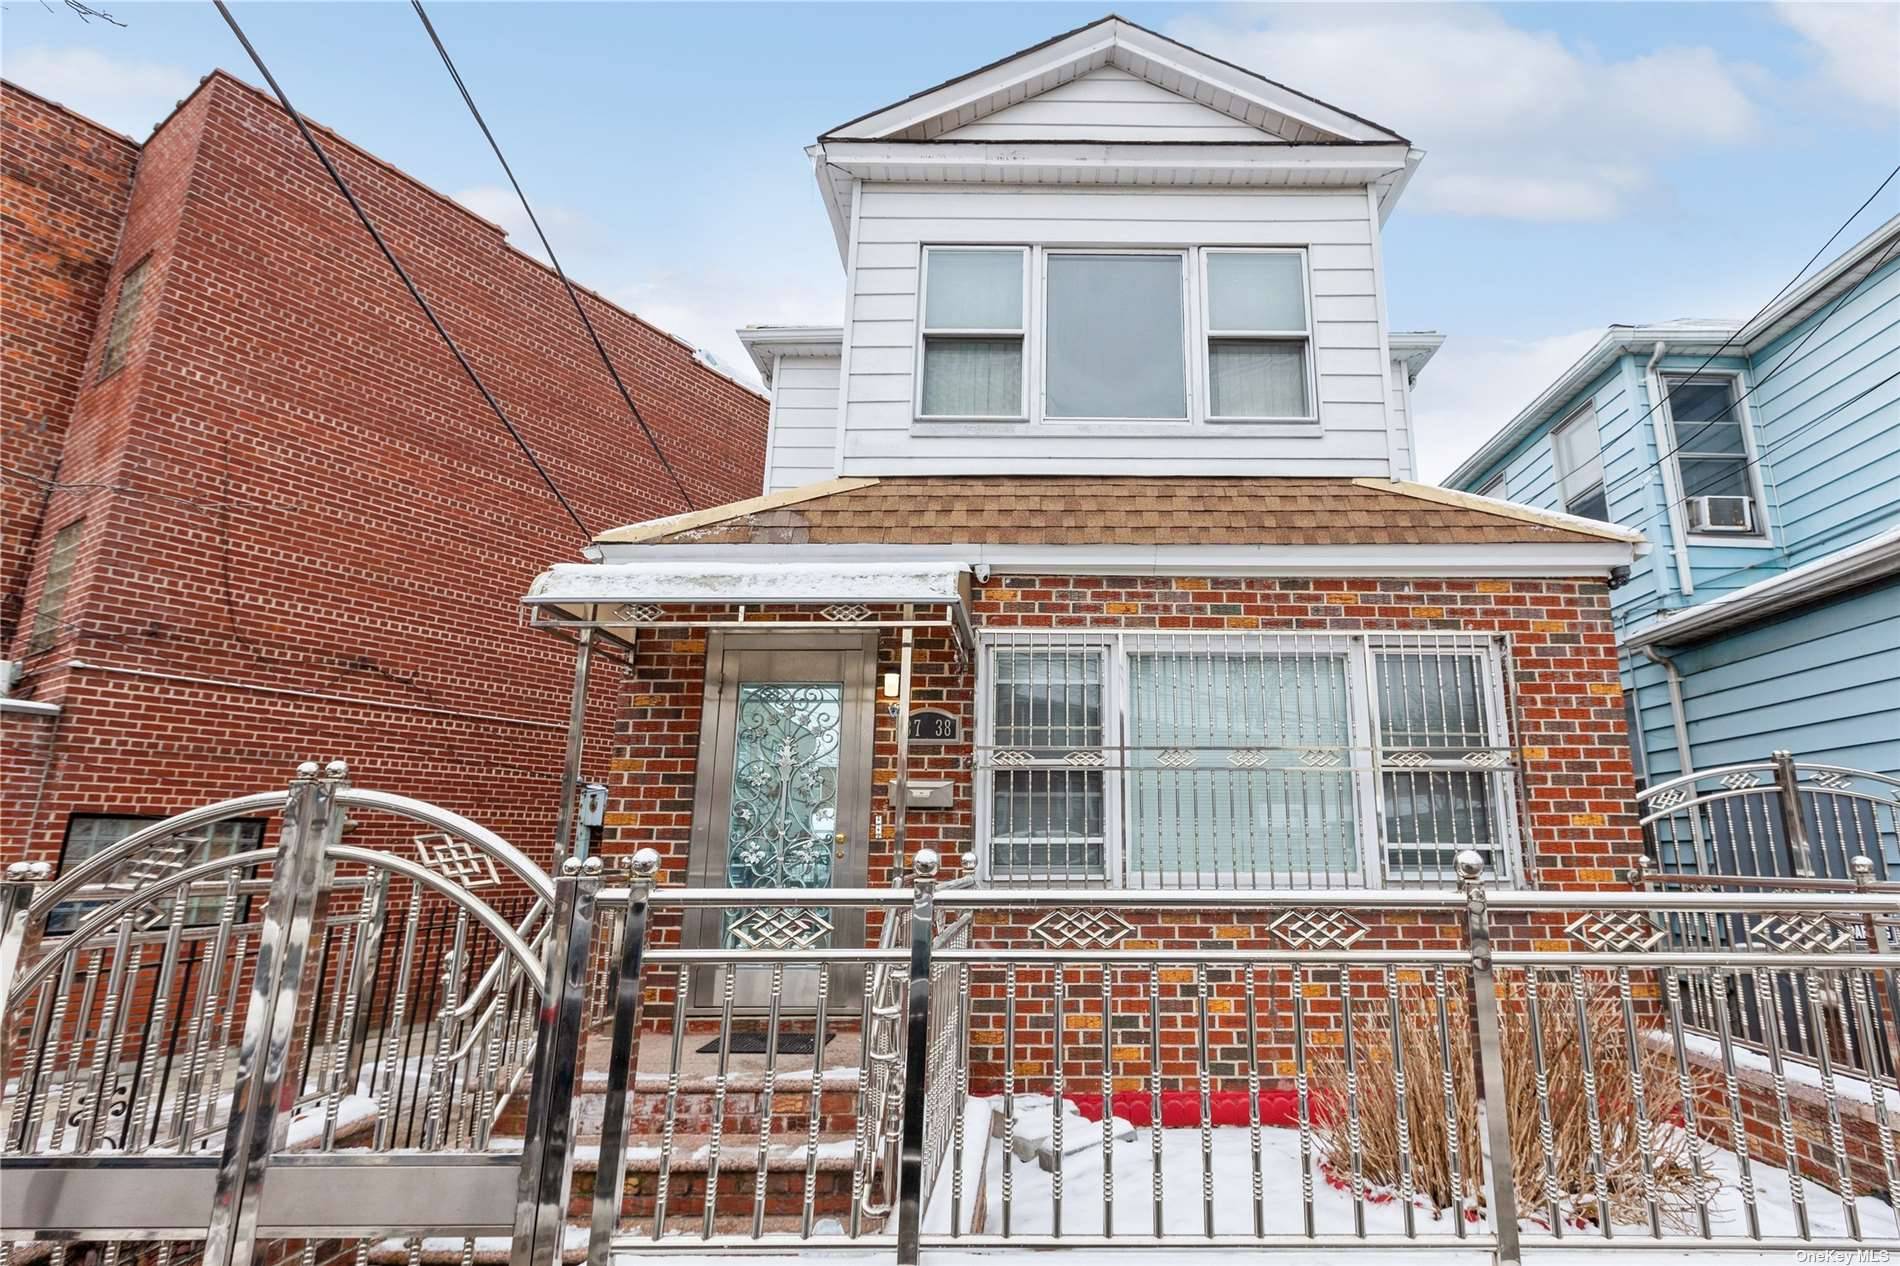 Great opportunity to own a Large Two Family property in the heart of Jackson Heights, Queens.